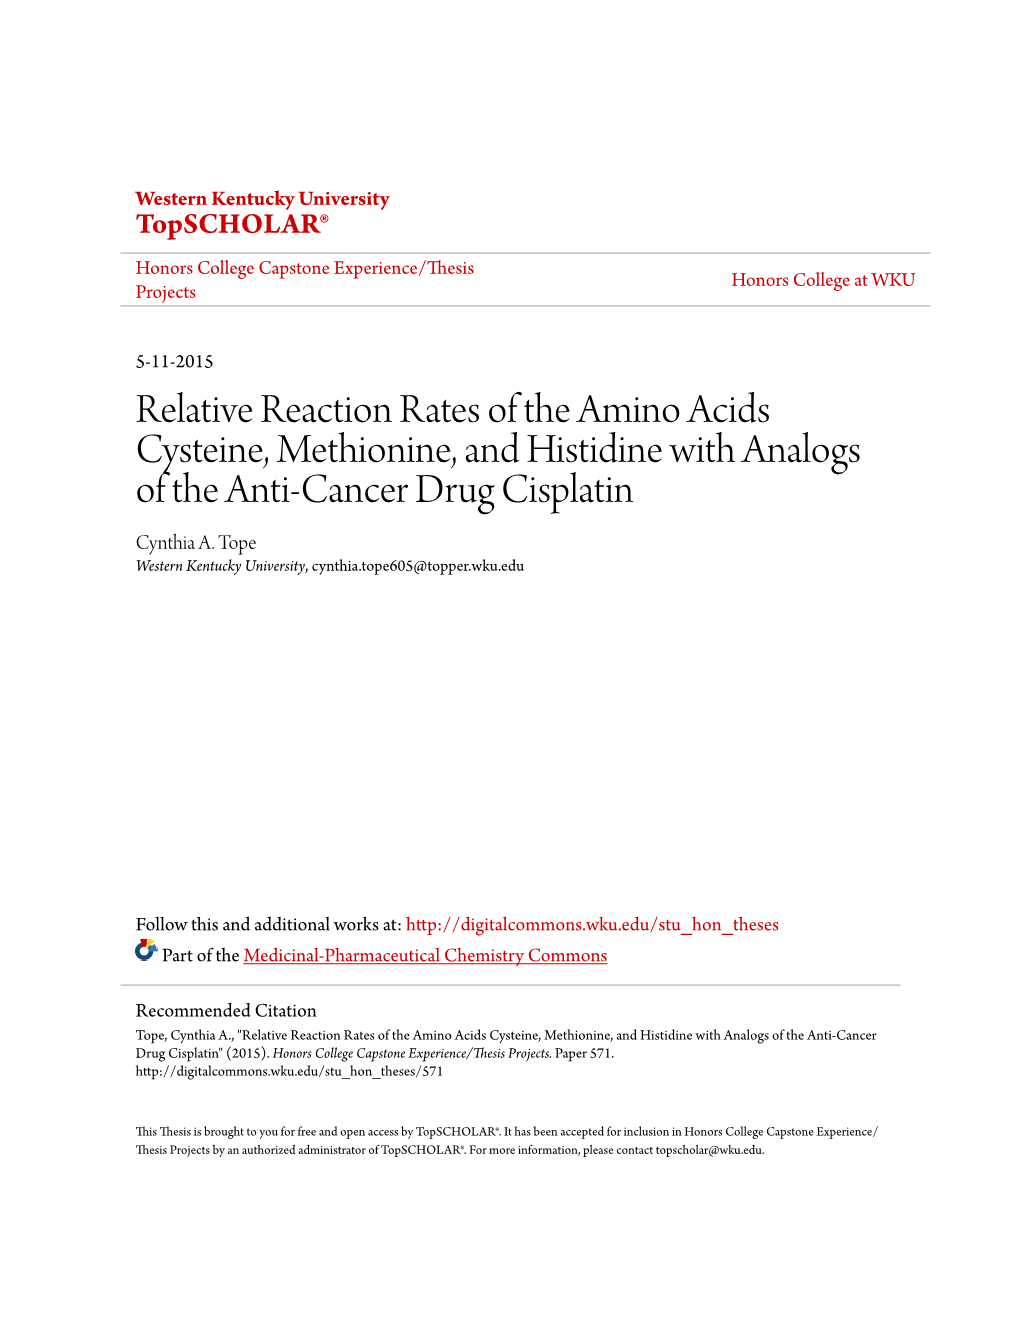 Relative Reaction Rates of the Amino Acids Cysteine, Methionine, and Histidine with Analogs of the Anti-Cancer Drug Cisplatin Cynthia A